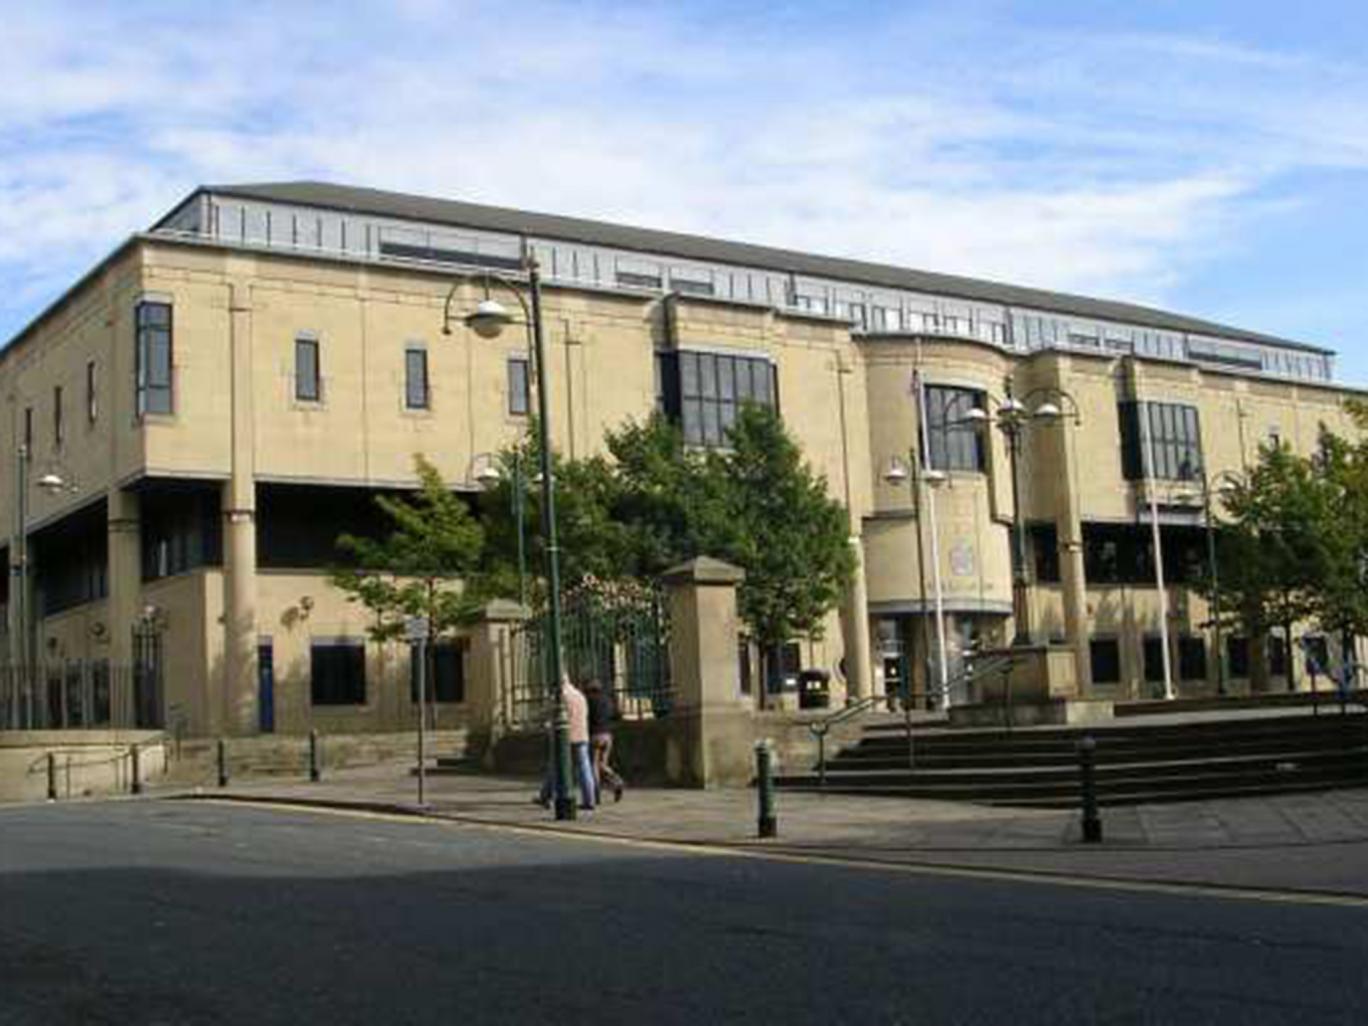 The teenager was given a two-year youth rehabilitation order at Bradford Crown Court